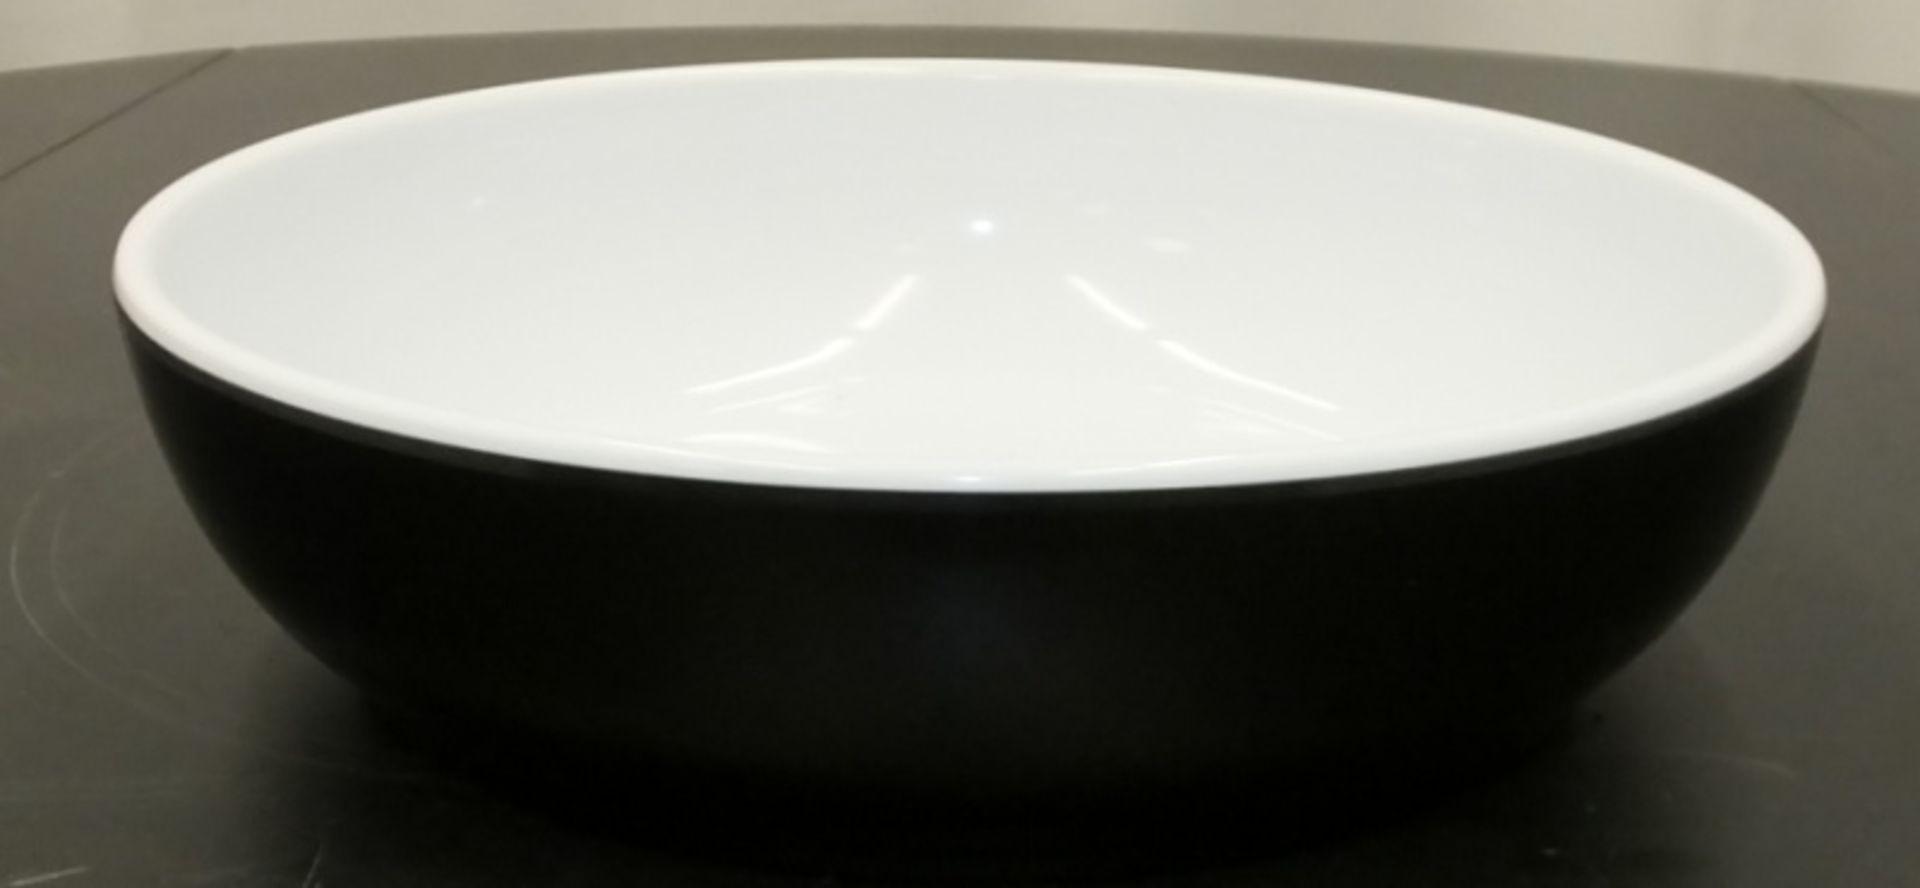 9x 2.5L Airpots - stainless steel, Black & Cream deli bowls x10, Blue serving trays - Image 3 of 4